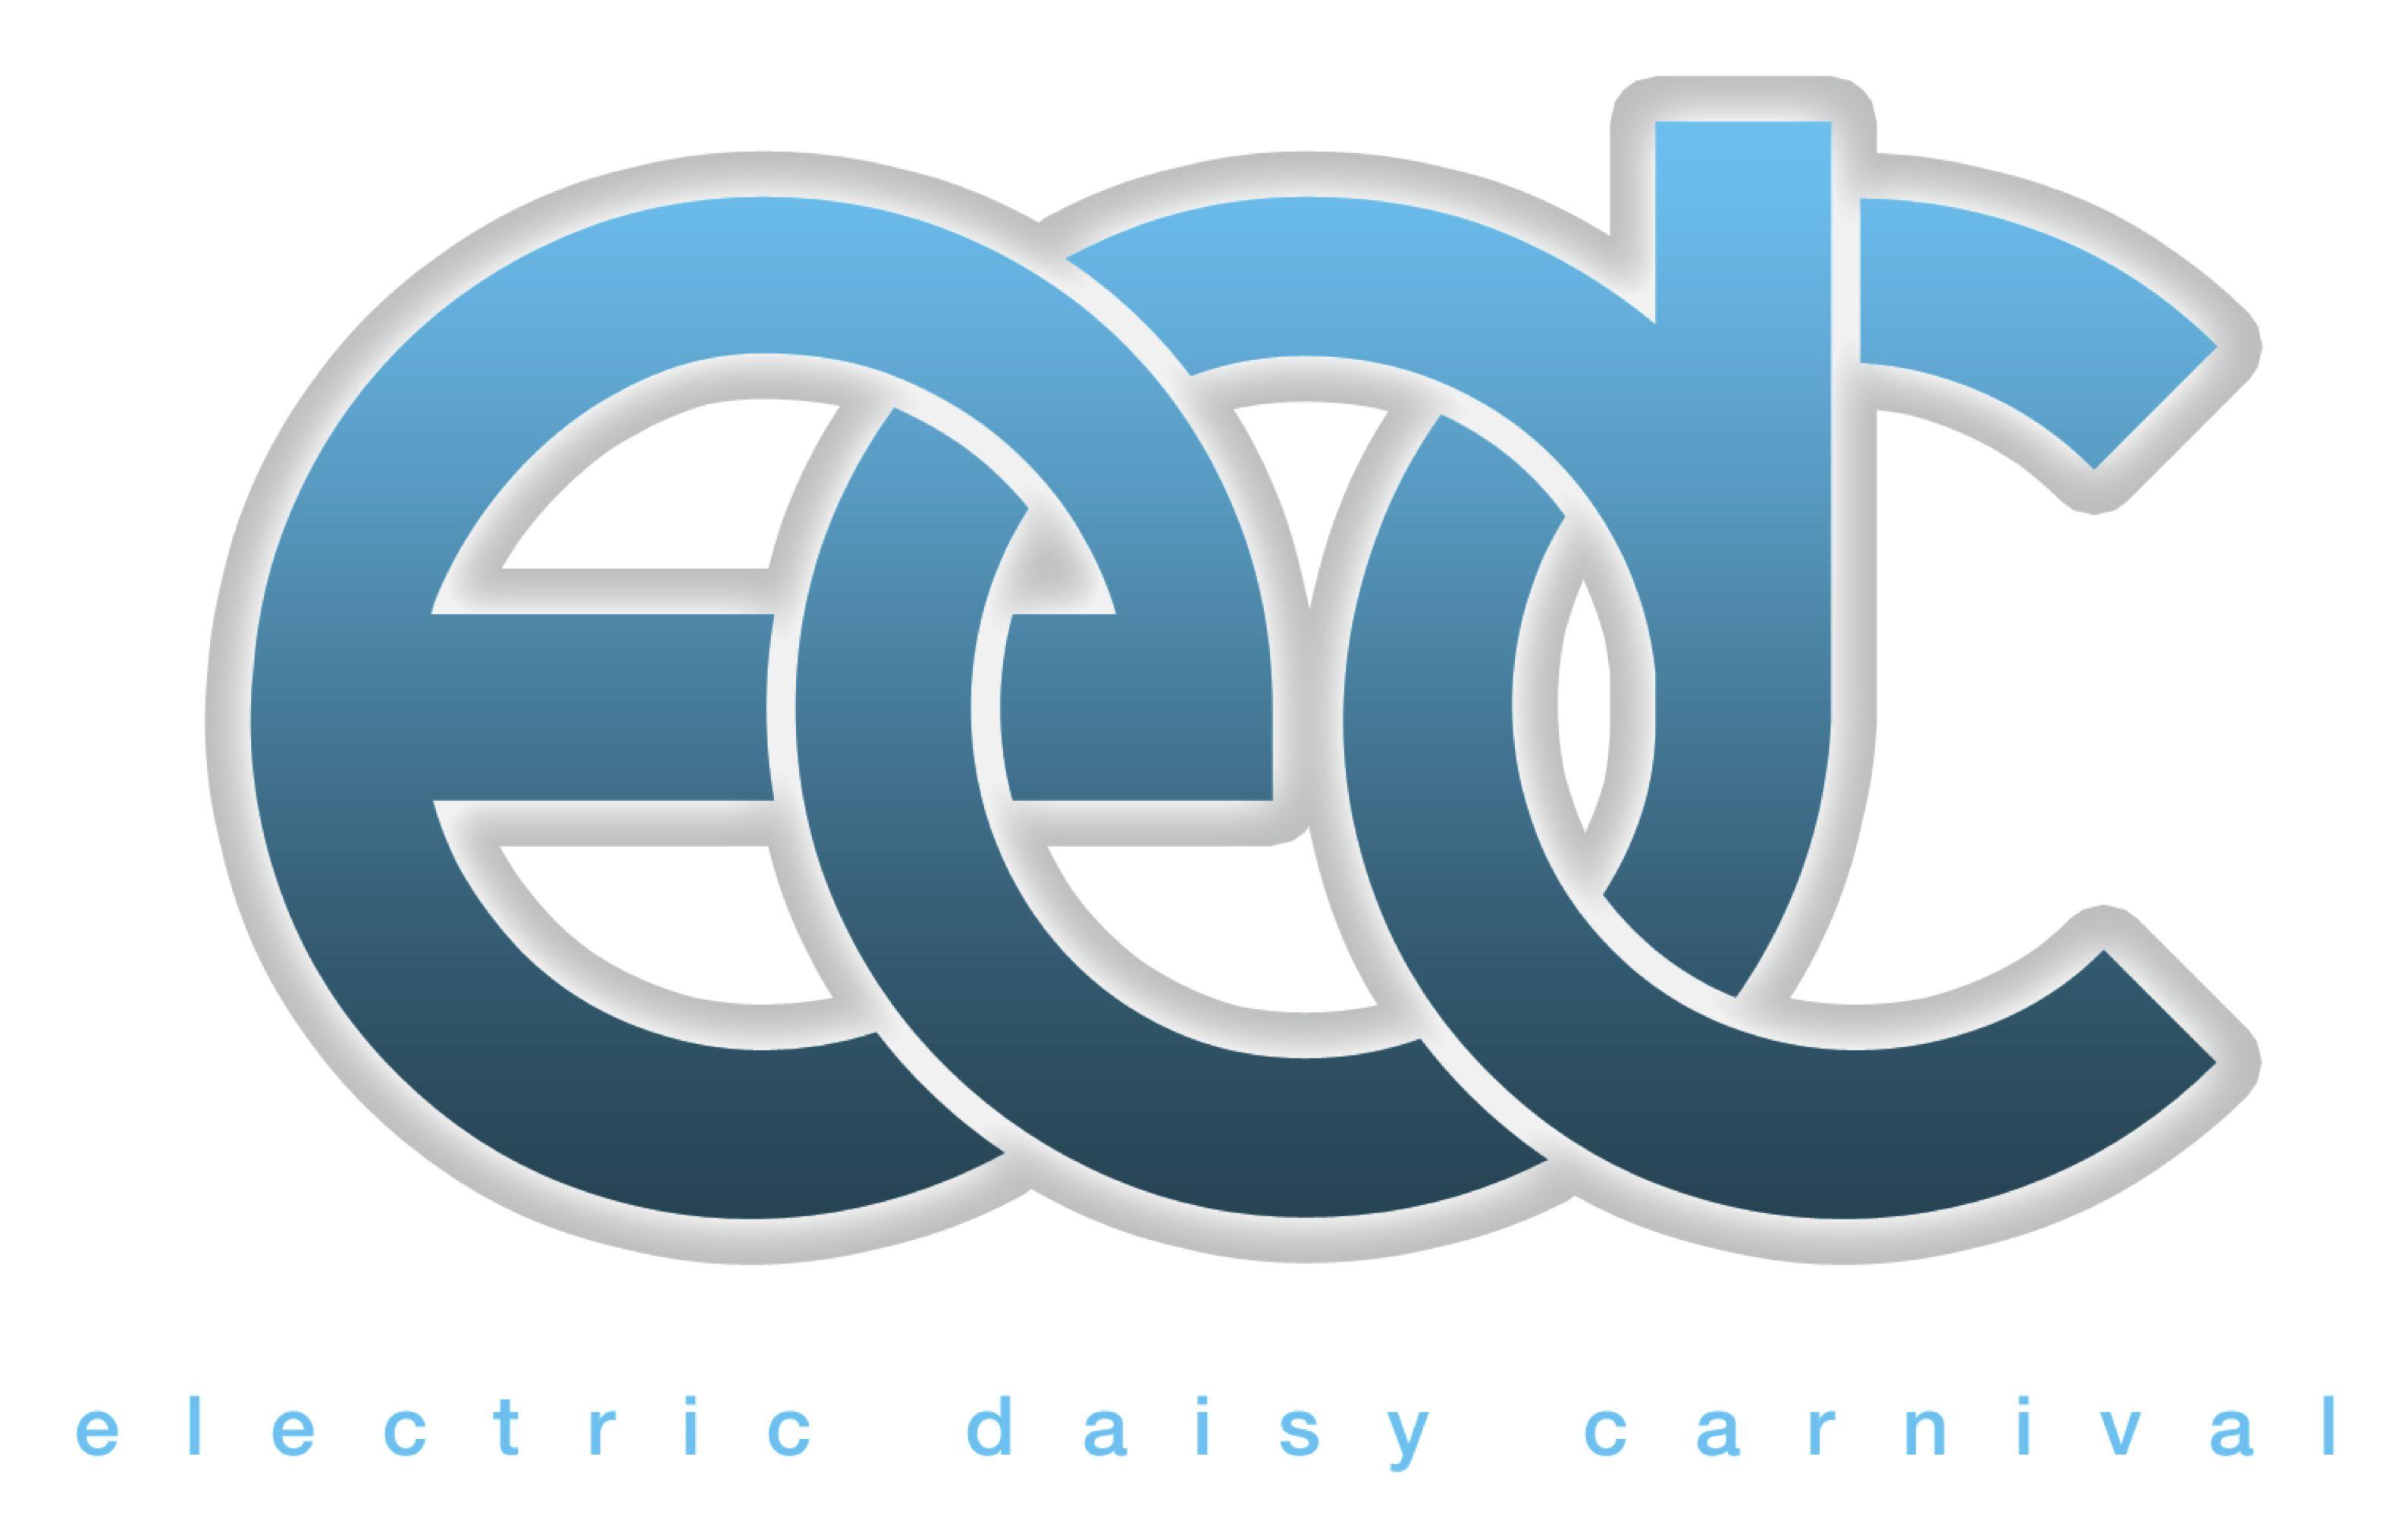 EDC Logo - Electric Daisy Carnival. My kind of thing. Electric daisy festival